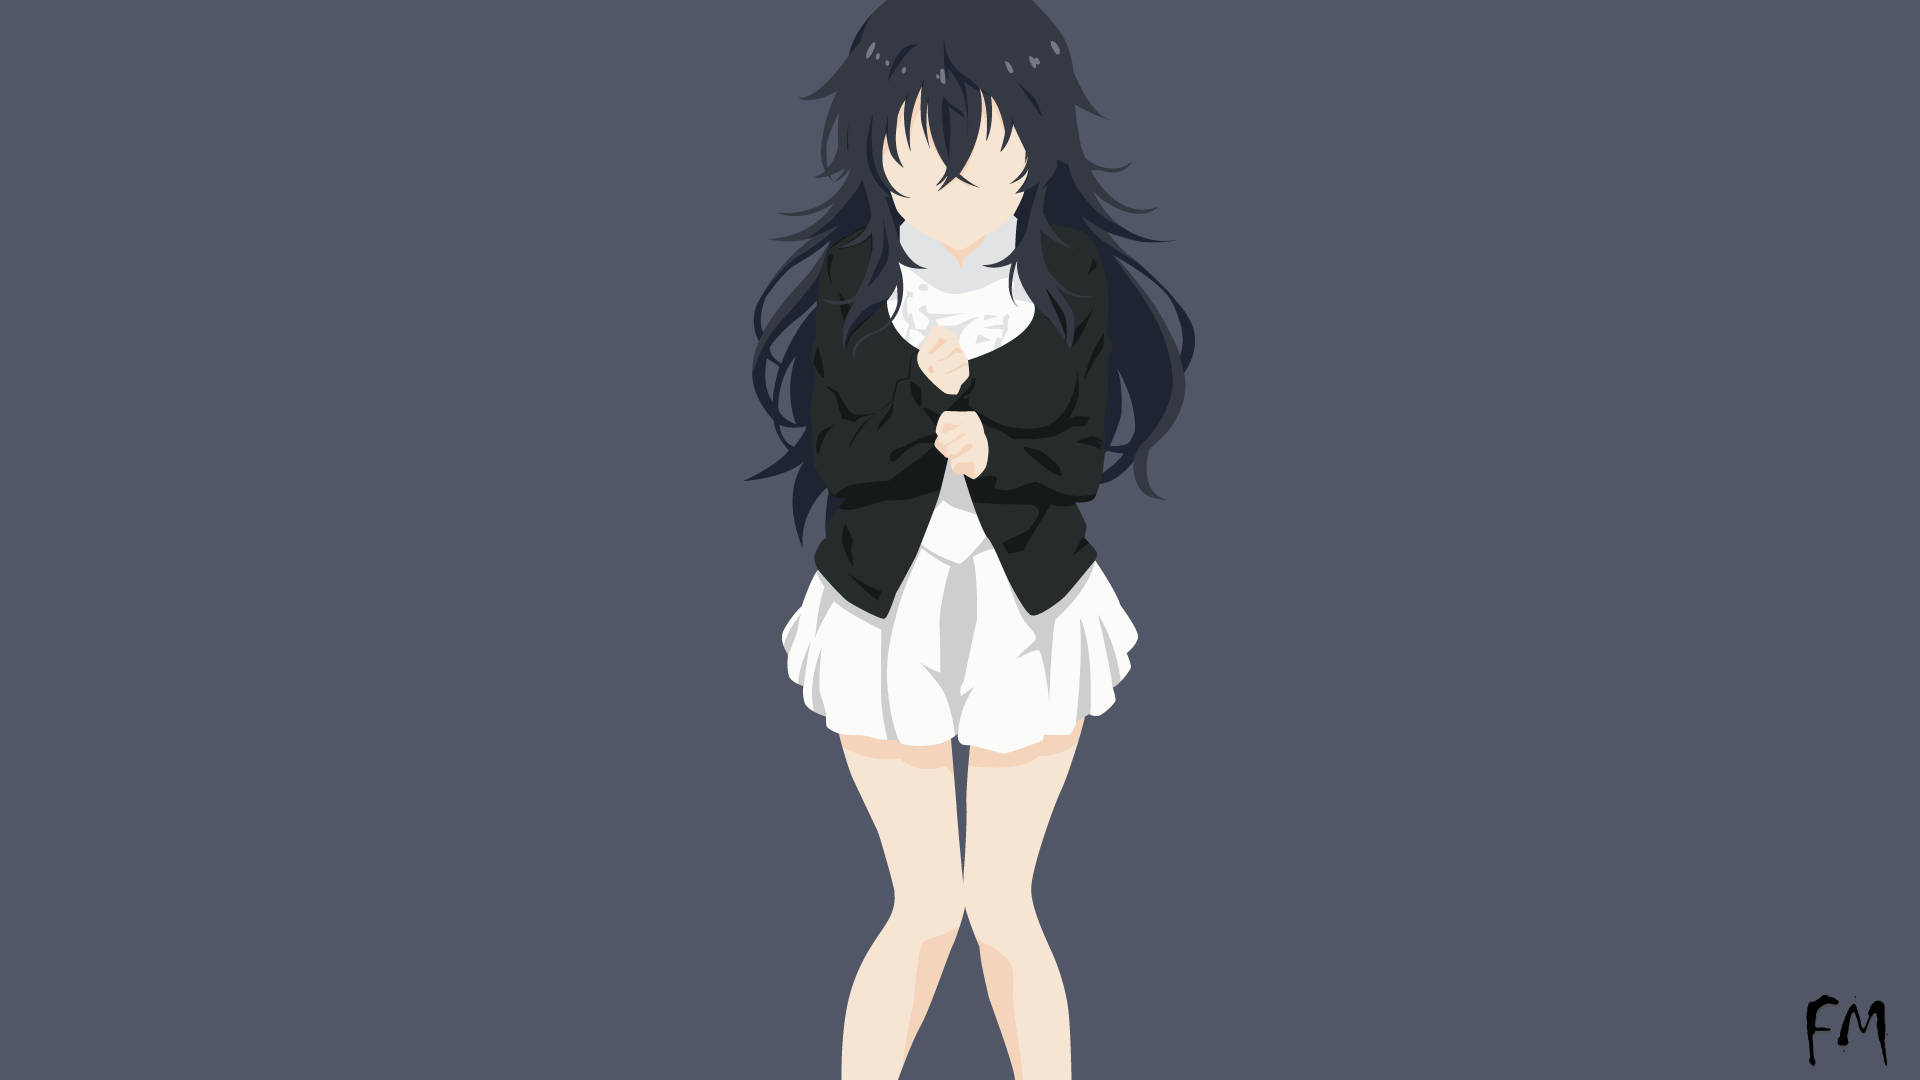 A Girl In A White Dress And Black Jacket Wallpaper